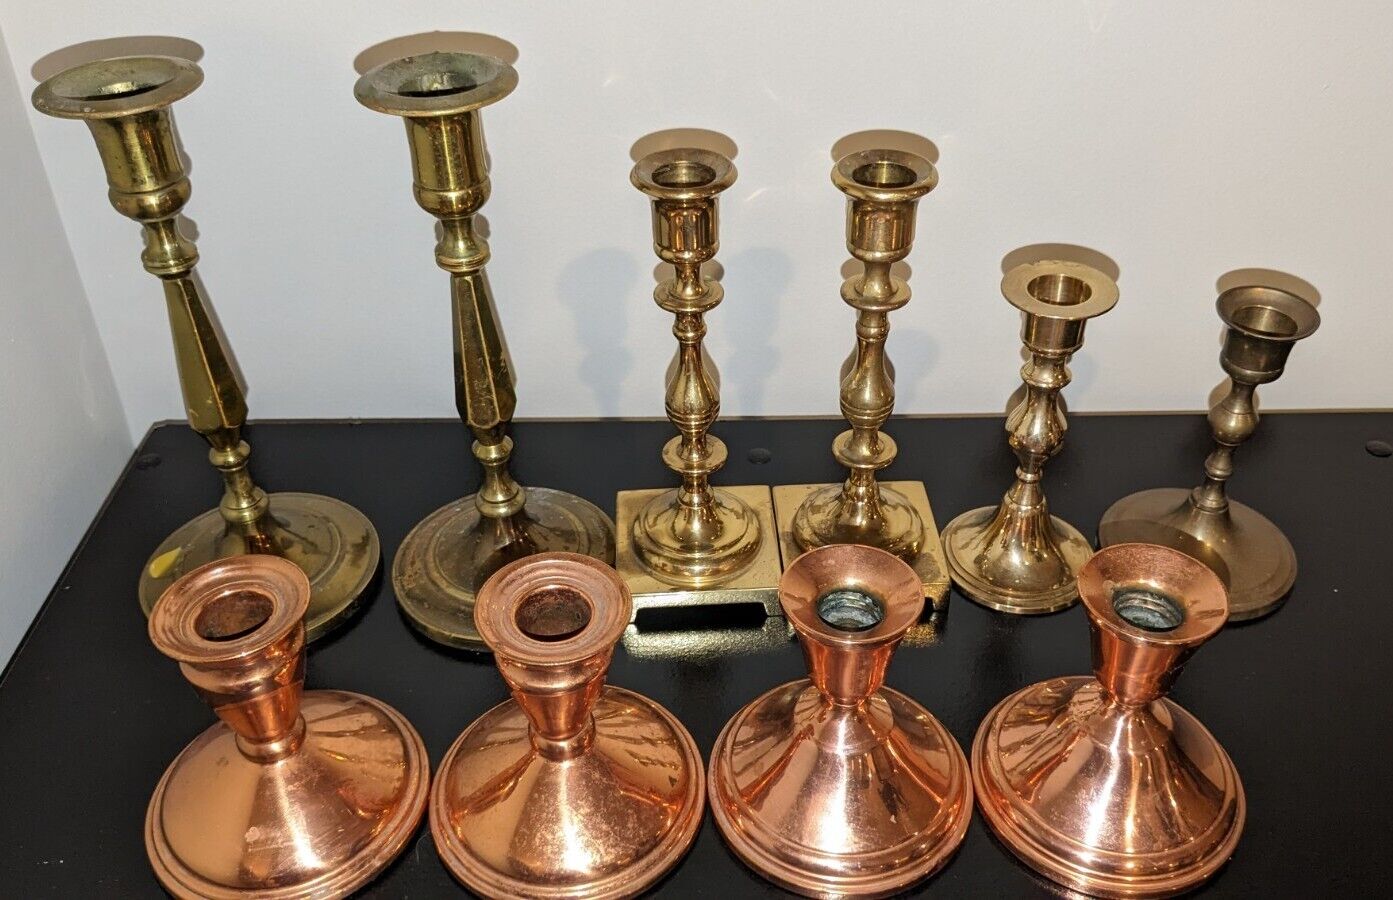  Vintage Lot Of 10 Brass And Copper Candle Stick Holders +Bonus